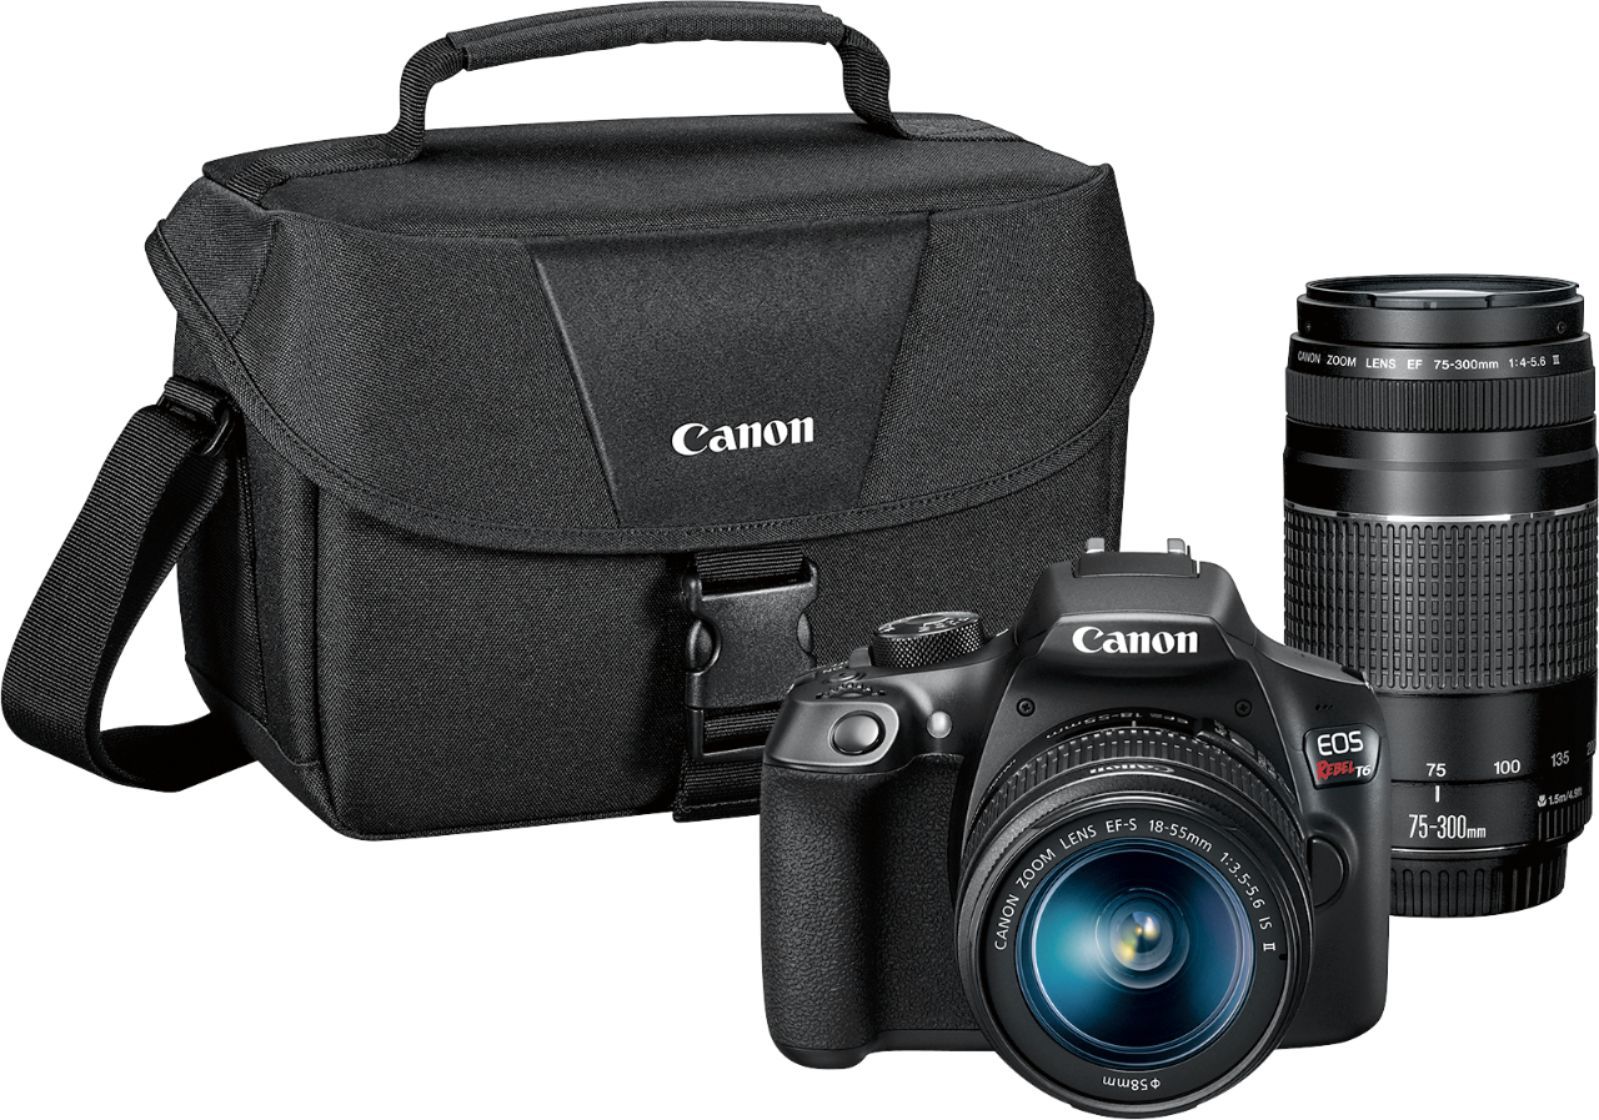 Canon EOS Rebel T6 DSLR Two Lens Kit with EF-S 18-55mm IS II and EF 75-300mm III lens Black 1159C... | Best Buy U.S.